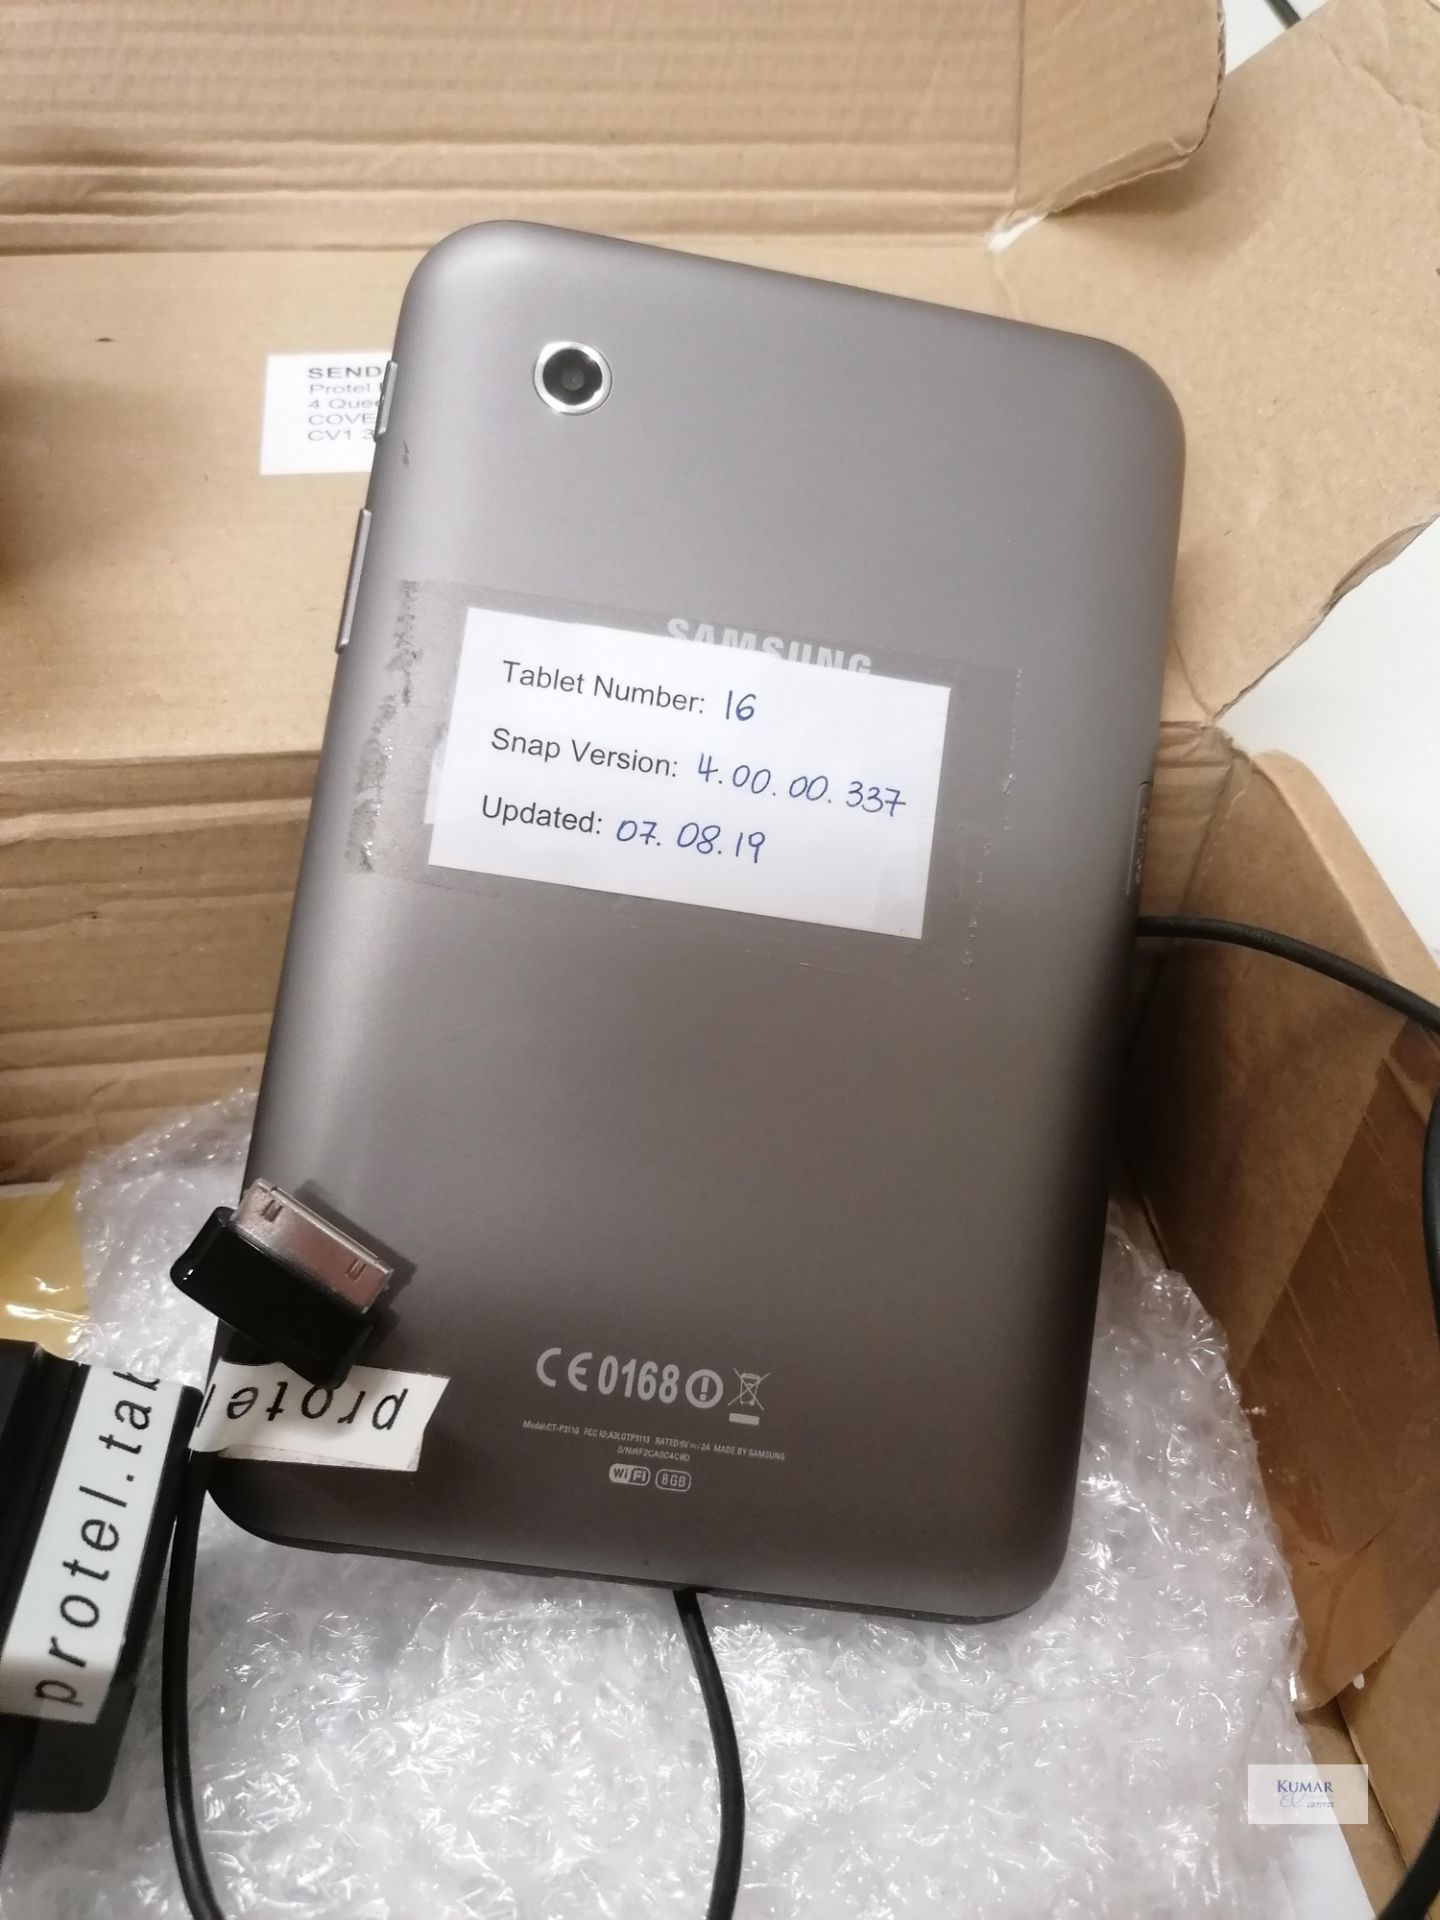 Samsung Tablet Model No GT-P3110 8GB Updated 07 08 2019 Cable and charger - Image 2 of 4